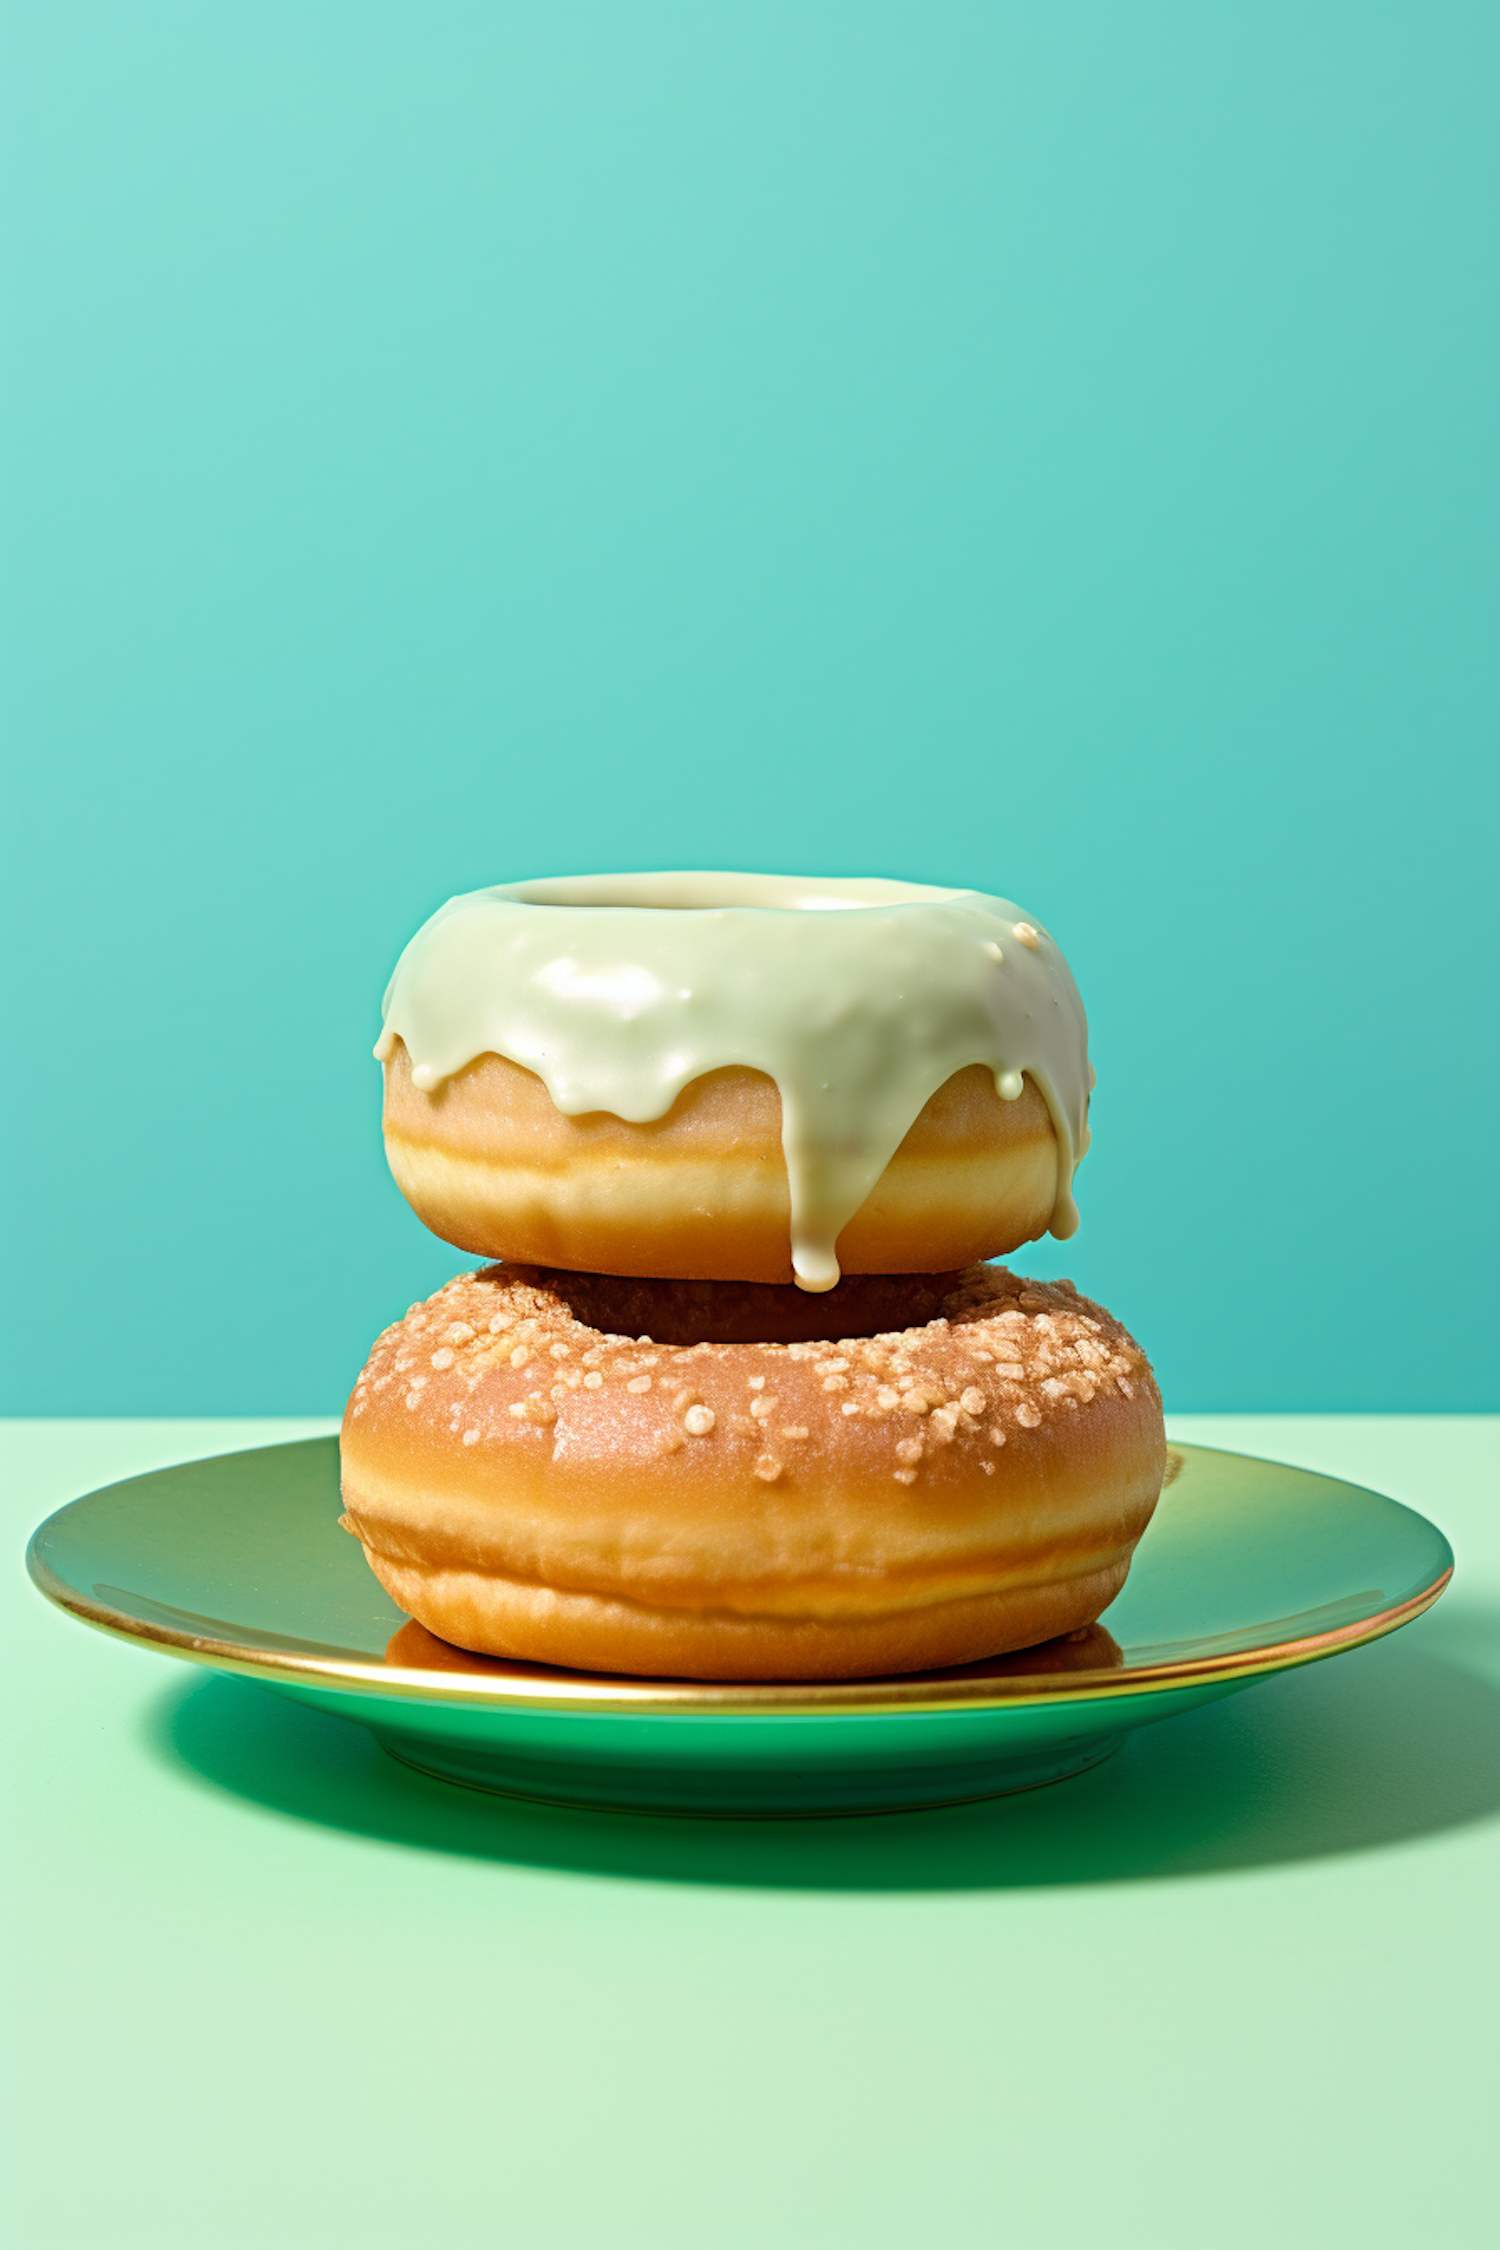 Glazed and Sugared Donuts on Teal